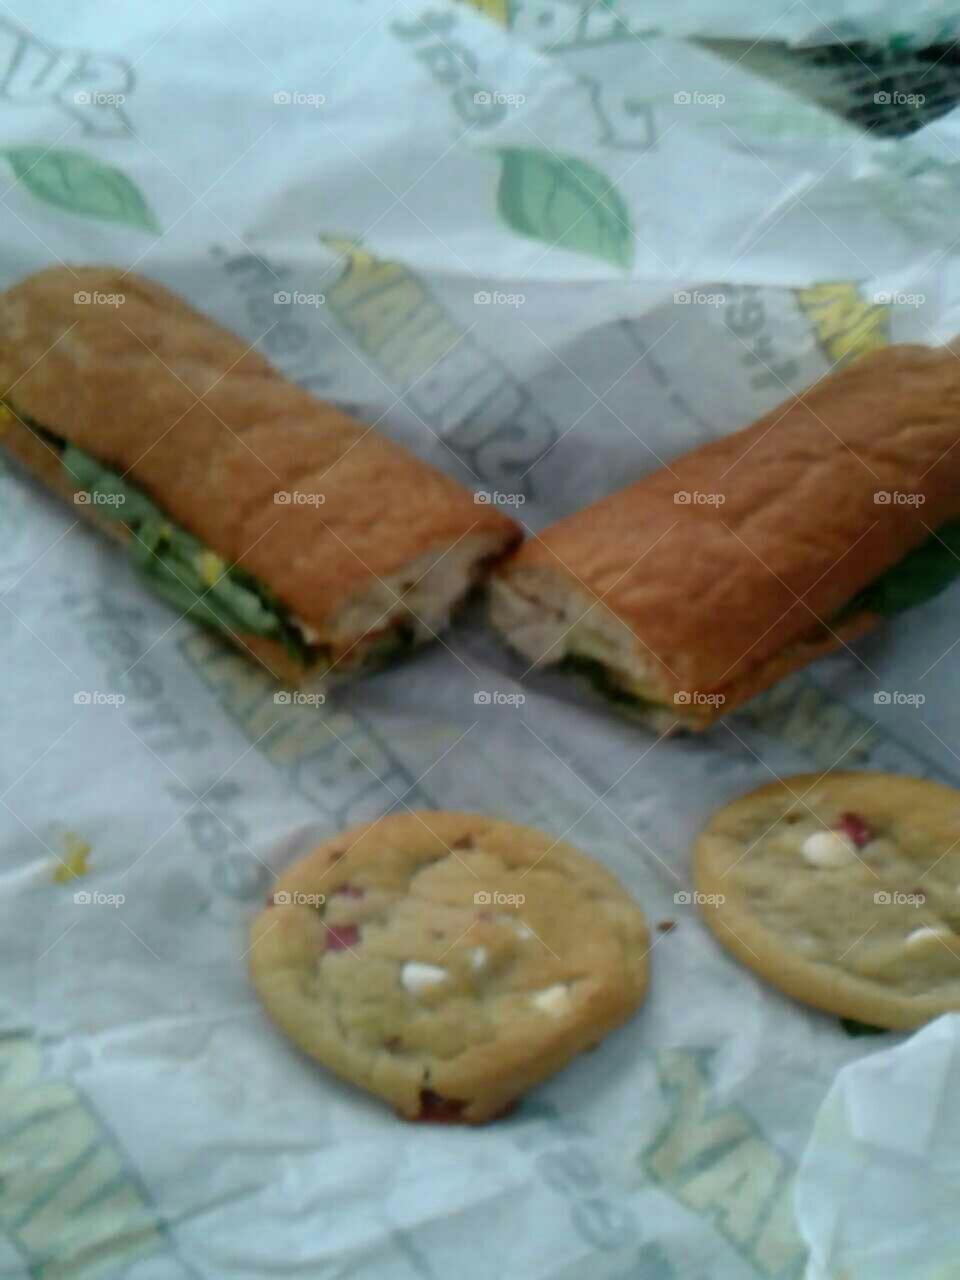 Raspberry cheesecake cookies with a footlong Subway sandwich.